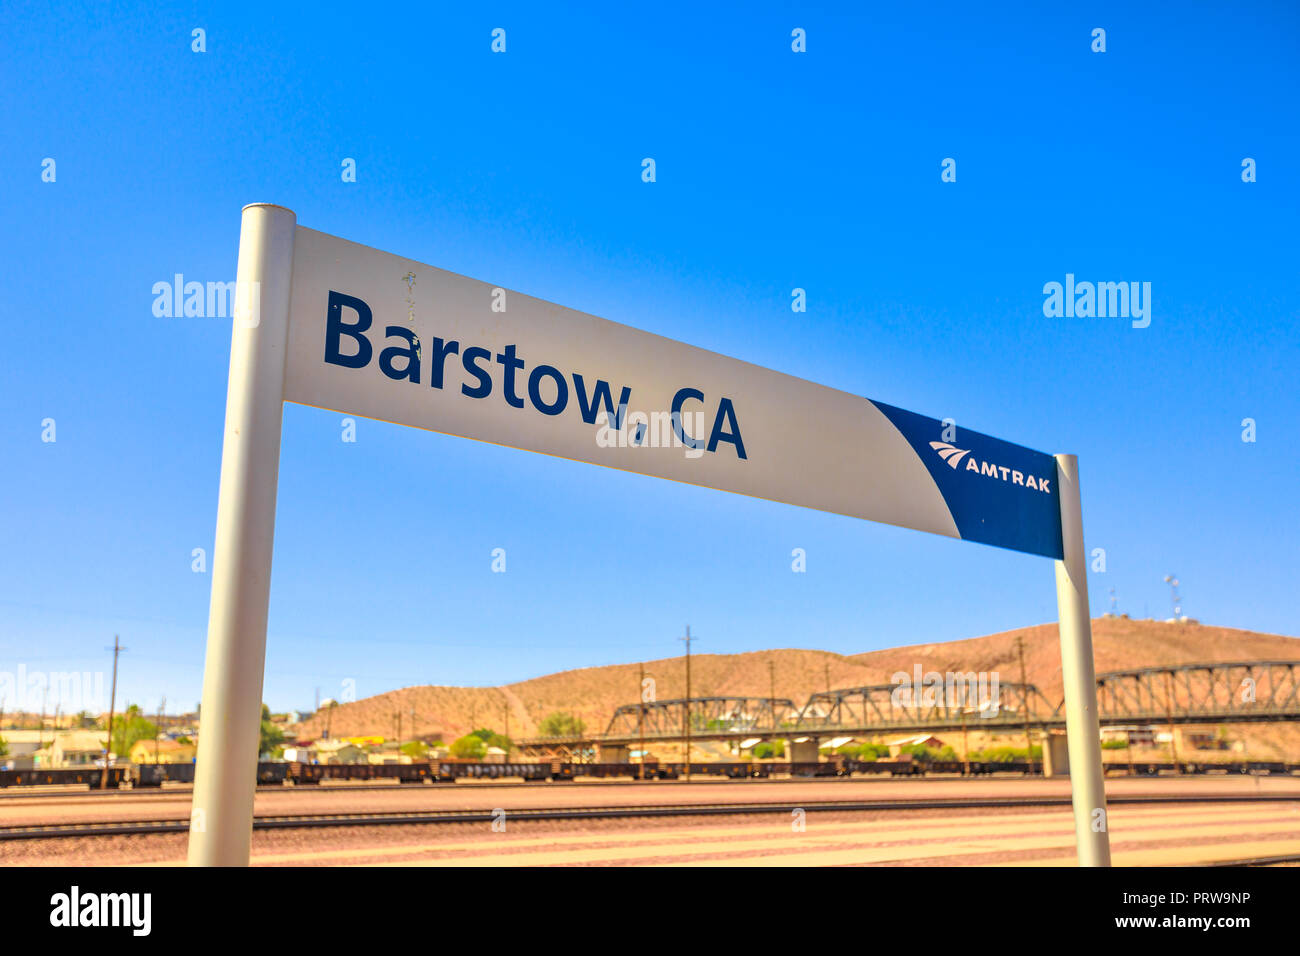 Barstow, California, USA - August 15, 2018: Amtrak Sign at Barstow train station on blue sky. Train Station Platform with Shelter in North First Avenue. Stock Photo